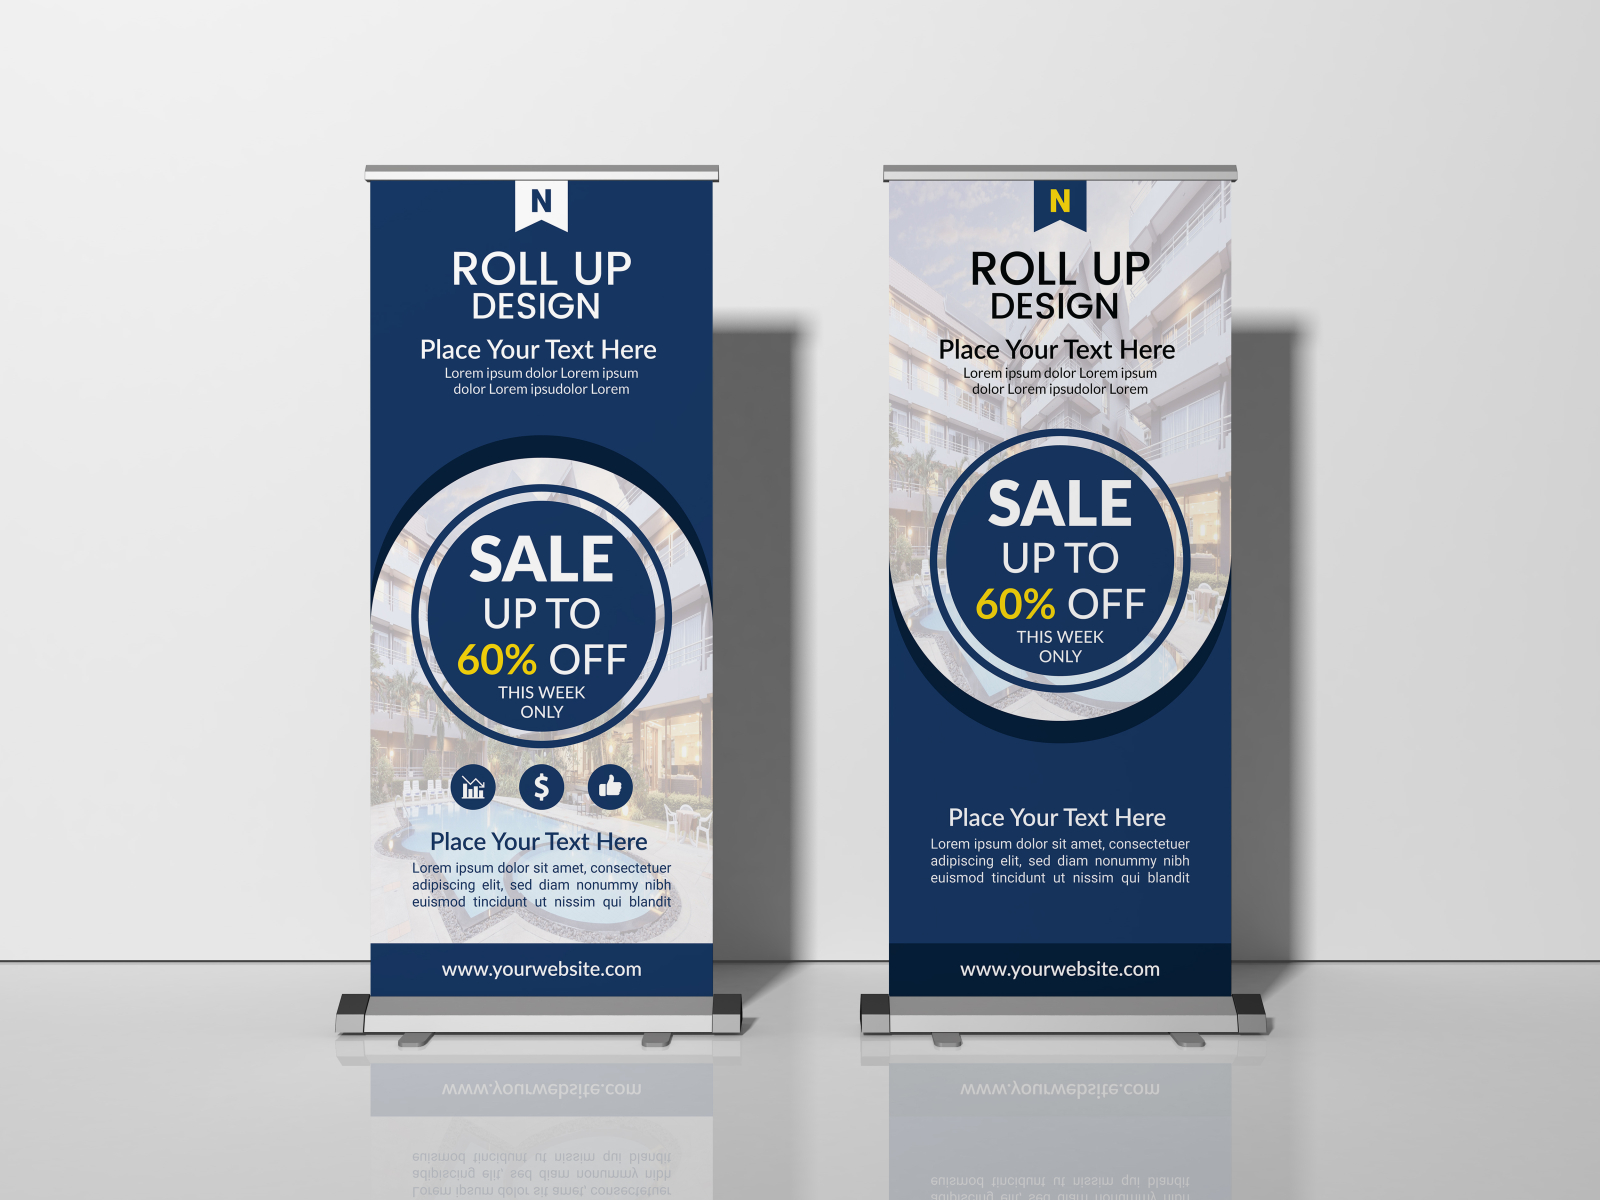 Roll Up banner design template by Nazmul Hassan on Dribbble